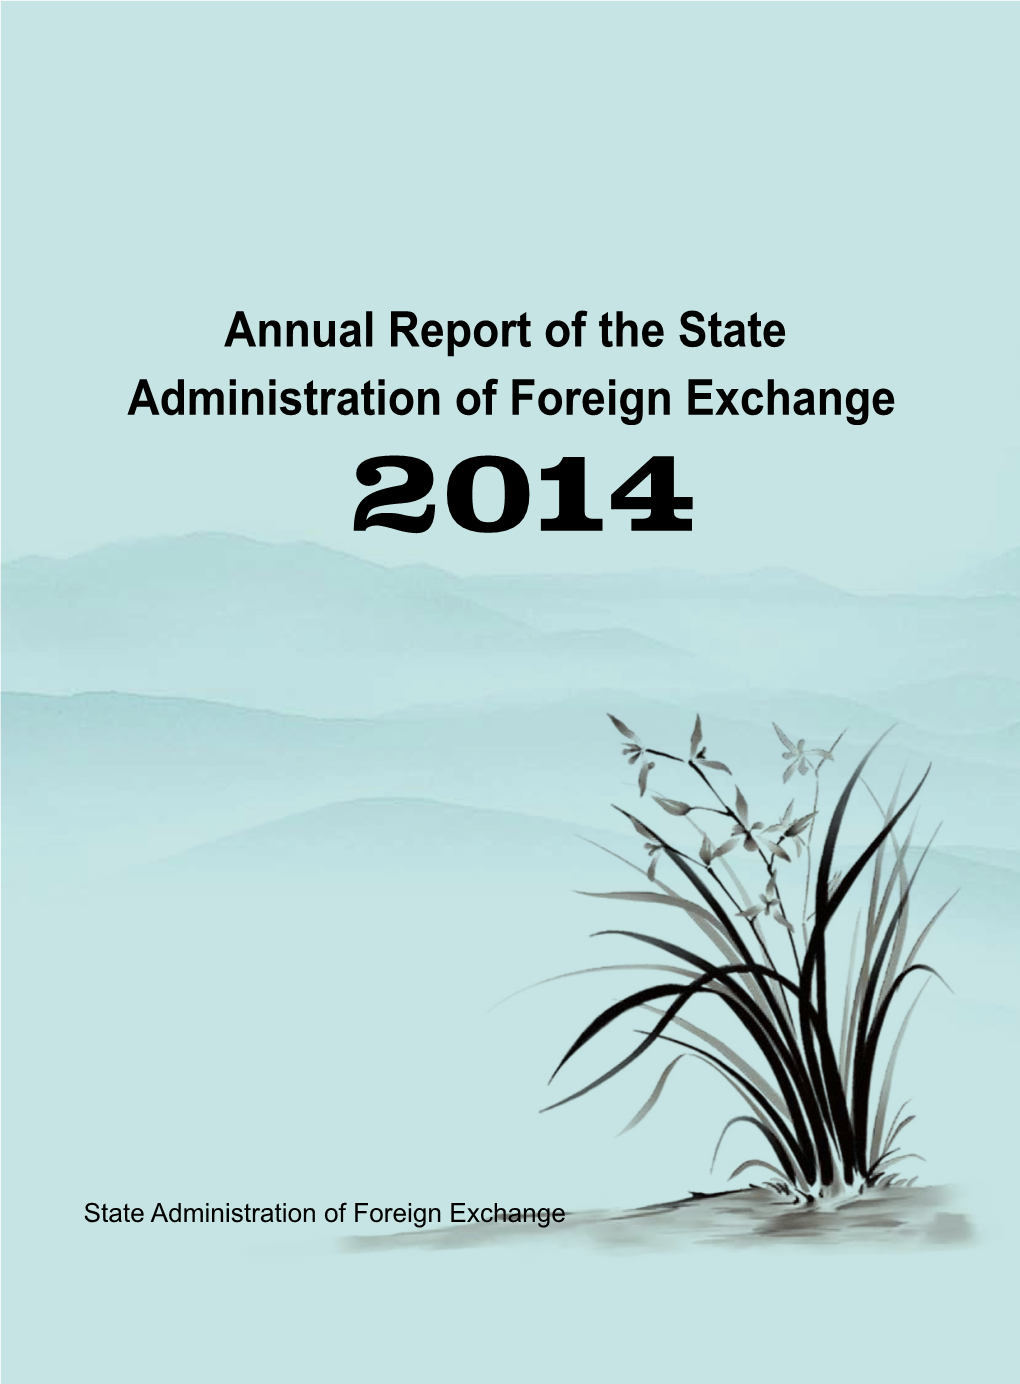 Annual Report of the State Administration of Foreign Exchange (2014)